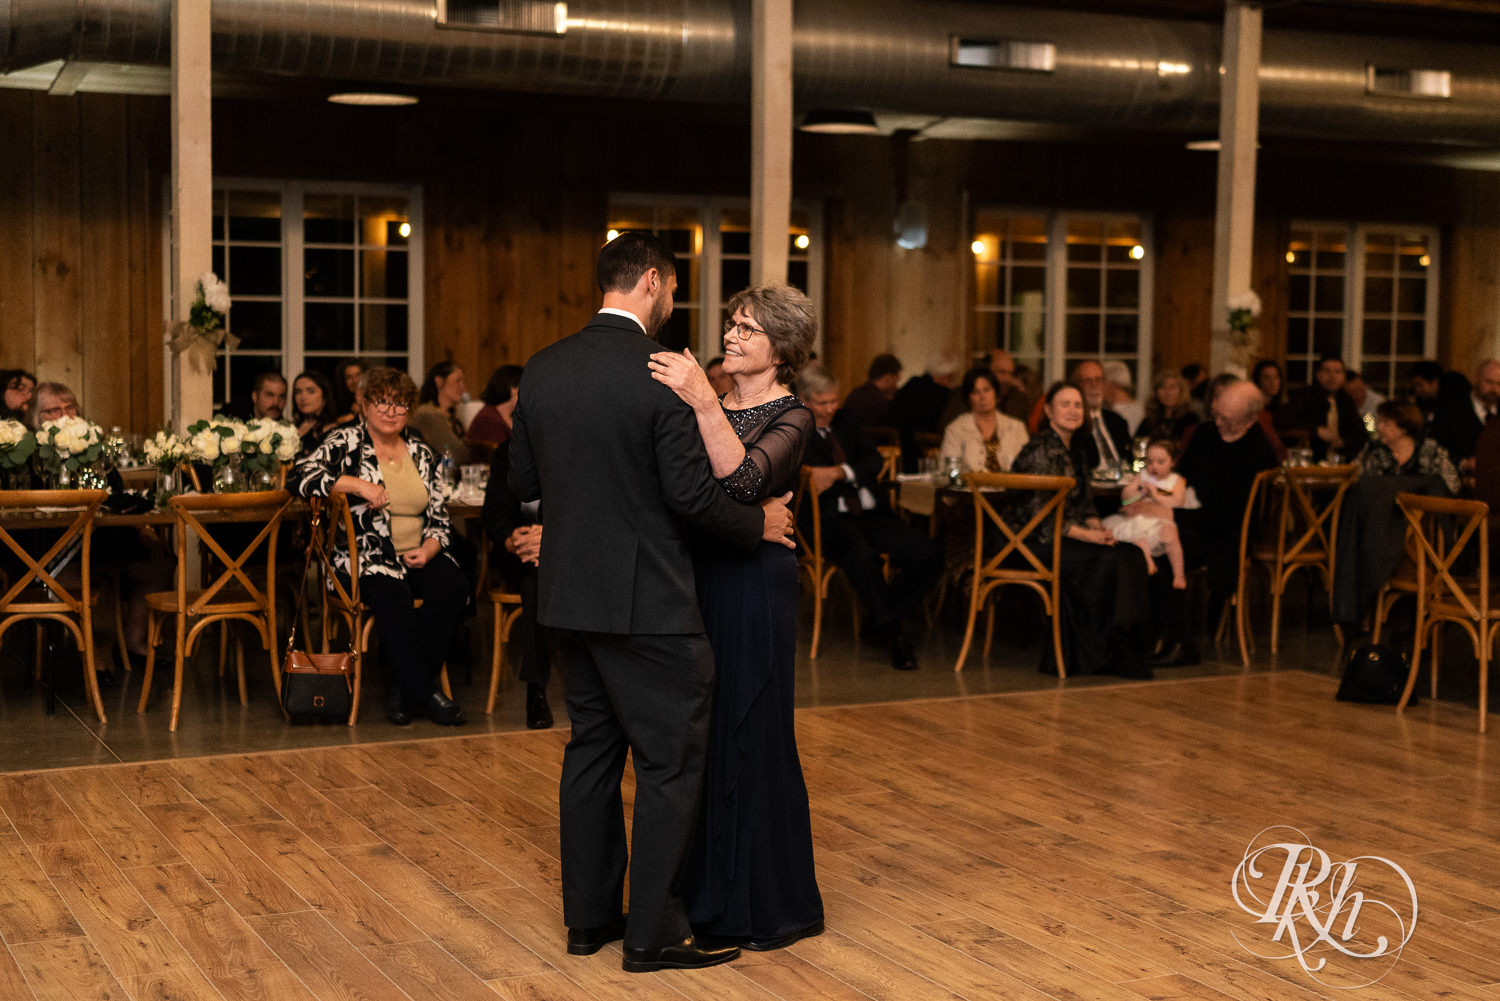 Groom and his mom dance at wedding reception at Almquist Farm in Hastings, Minnesota.